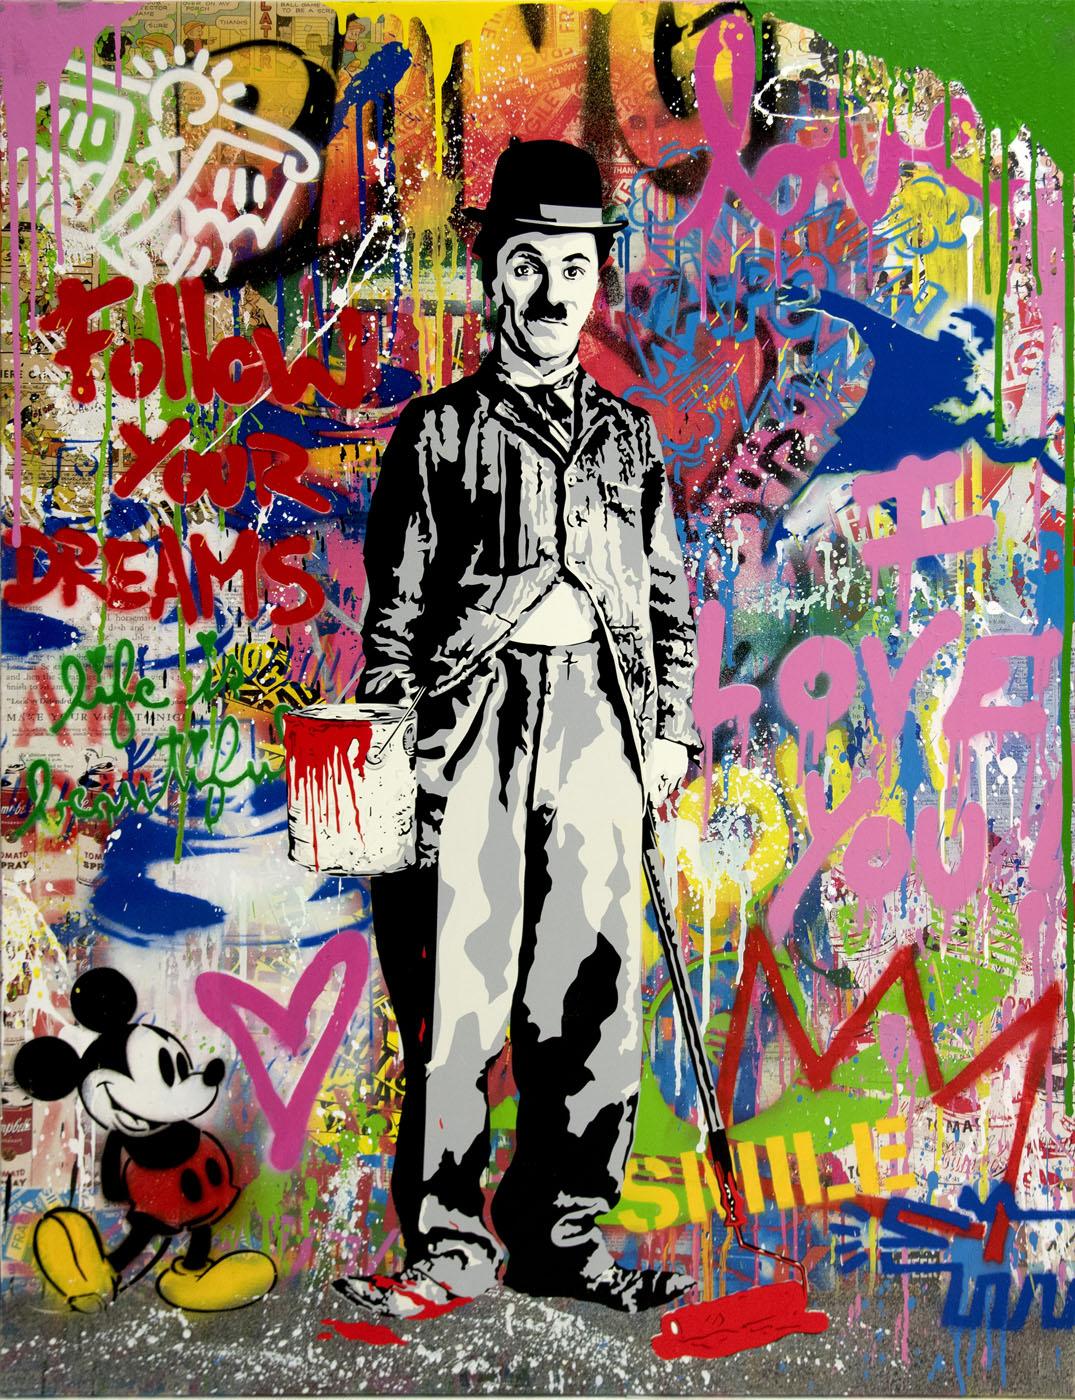 Mr. Brainwash Portrait Painting - Charlie Chaplin Painting with Mickey Mouse & Keith Haring "Follow Your Dreams"